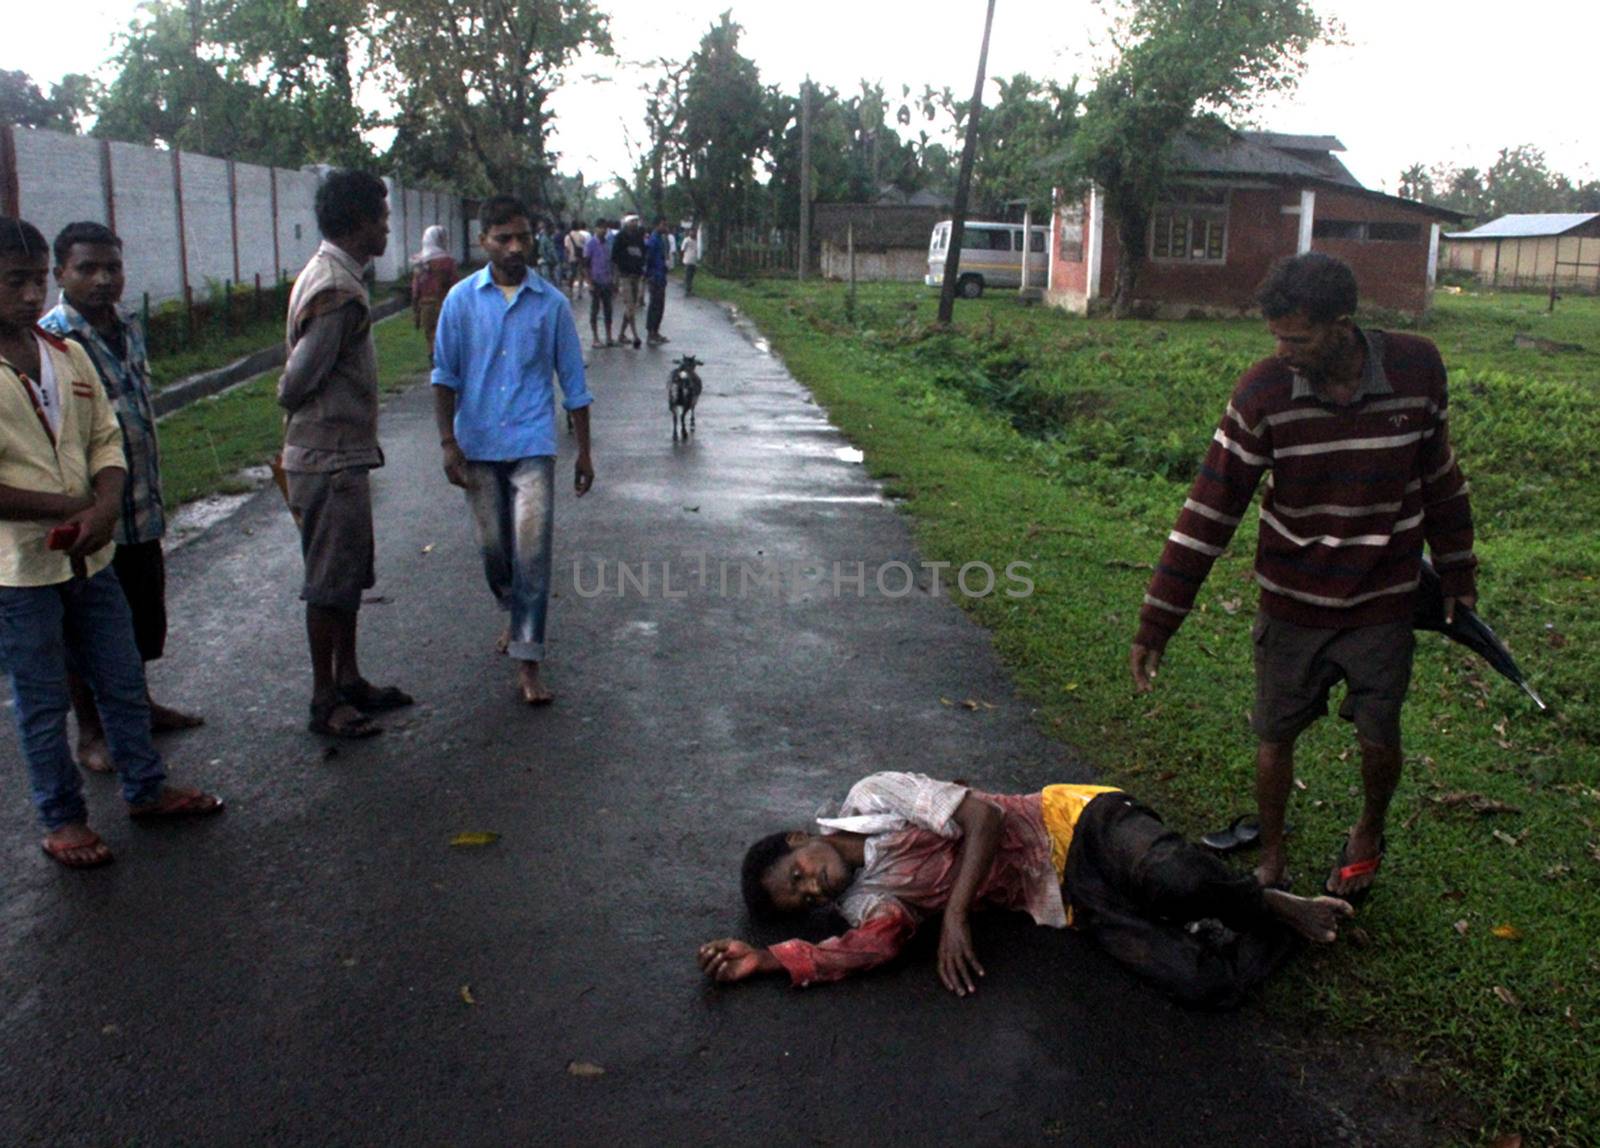 INDIA, Tinsukia: [WARNING: graphic content] A man lies bloodied on the ground after a protest where at least eleven people were killed, and twelve others injured, when a high-voltage electric cable was hit by stray police fire and fell on protesters in Tinsukia, Assam, India on April 11, 2016. Protesters had reportedly stormed a police station, calling on police to hand over a group of suspects arrested for killing two people last week. Police opened fire to disperse protesters, and a stray bullet severed the power line, which fell and electrocuted demonstrators.